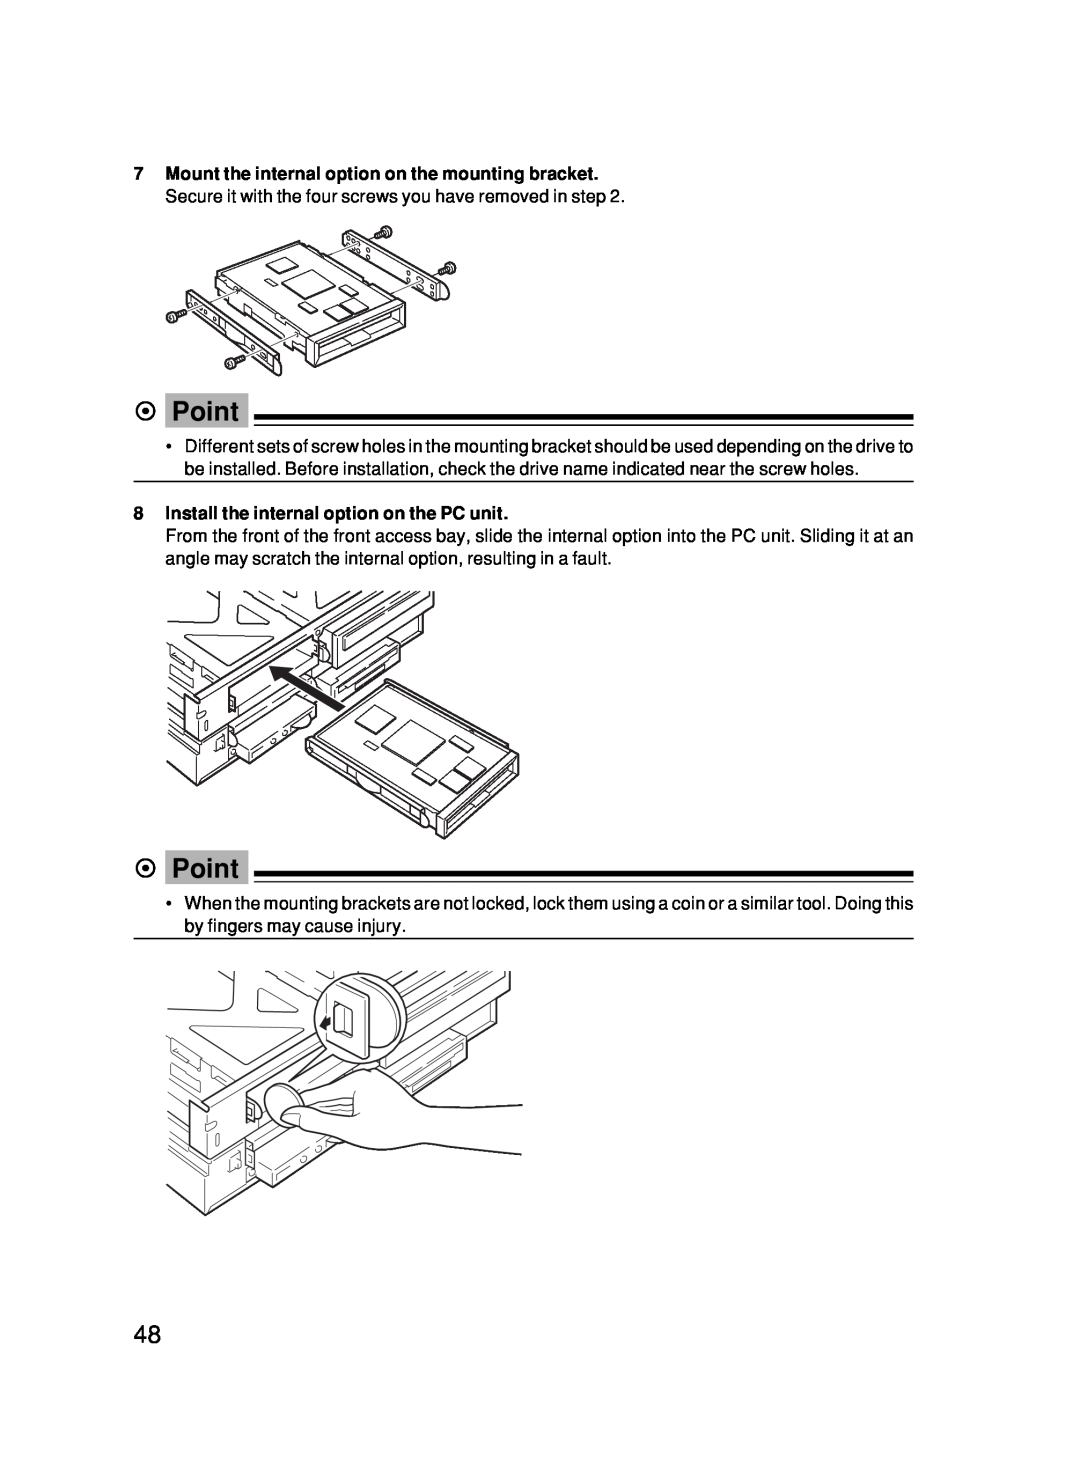 Fujitsu 500 user manual Install the internal option on the PC unit, Point 